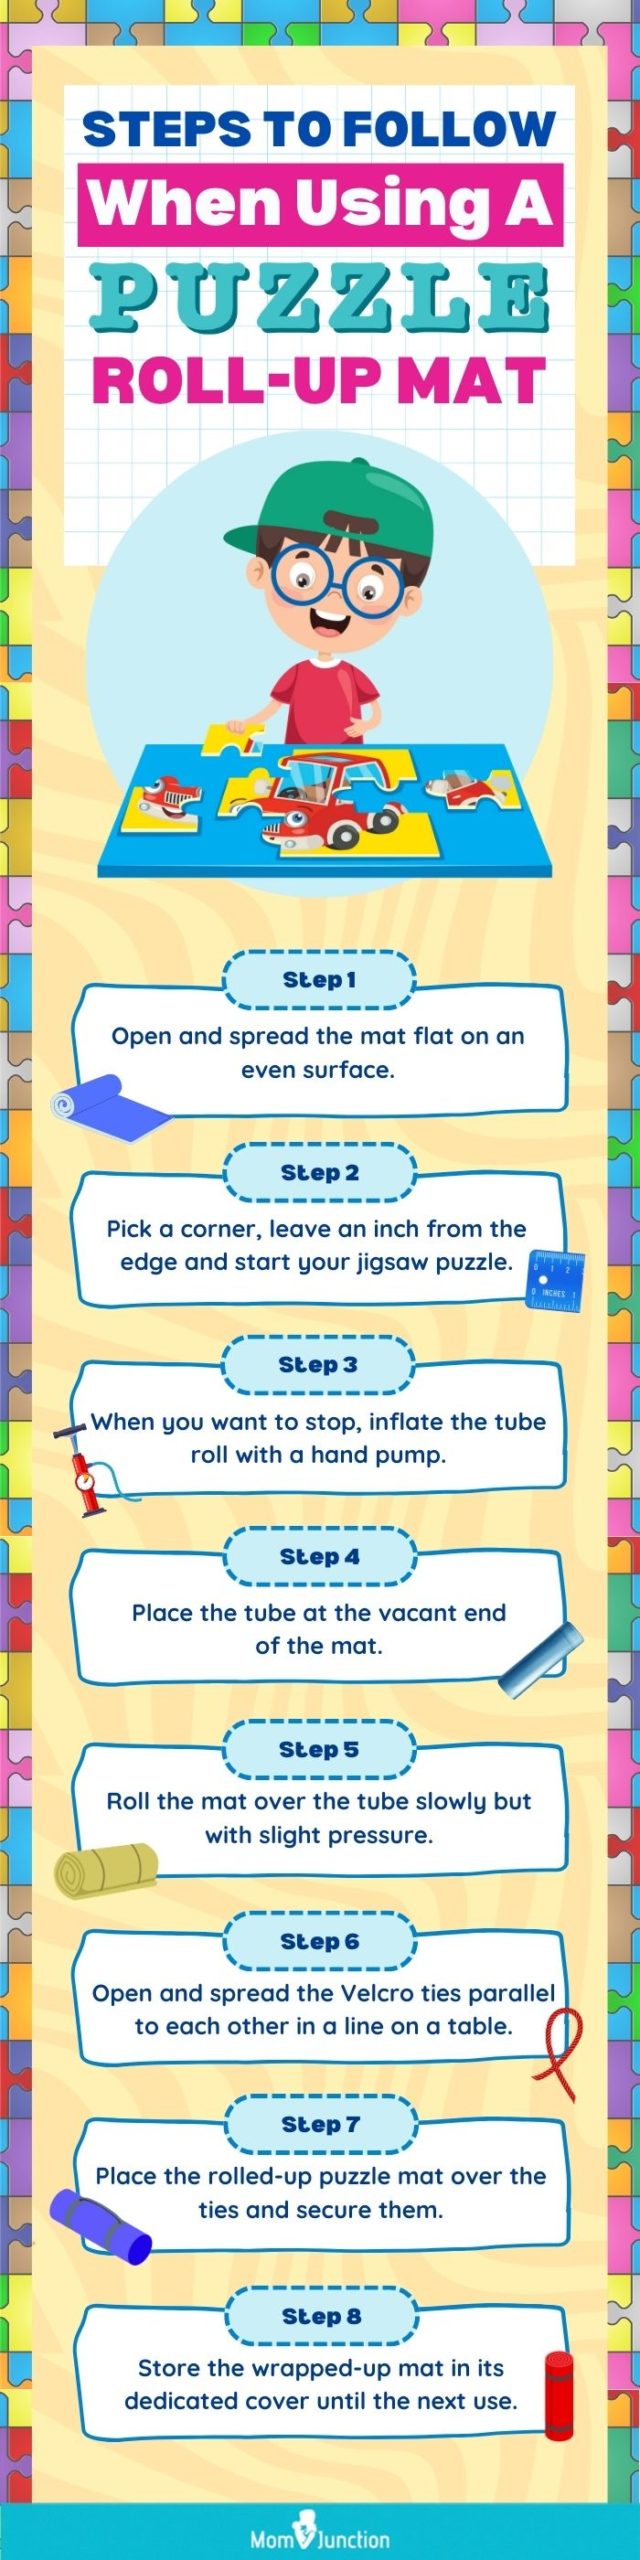 Steps To Follow When Using A Puzzle Roll-Up Mat (infographic)